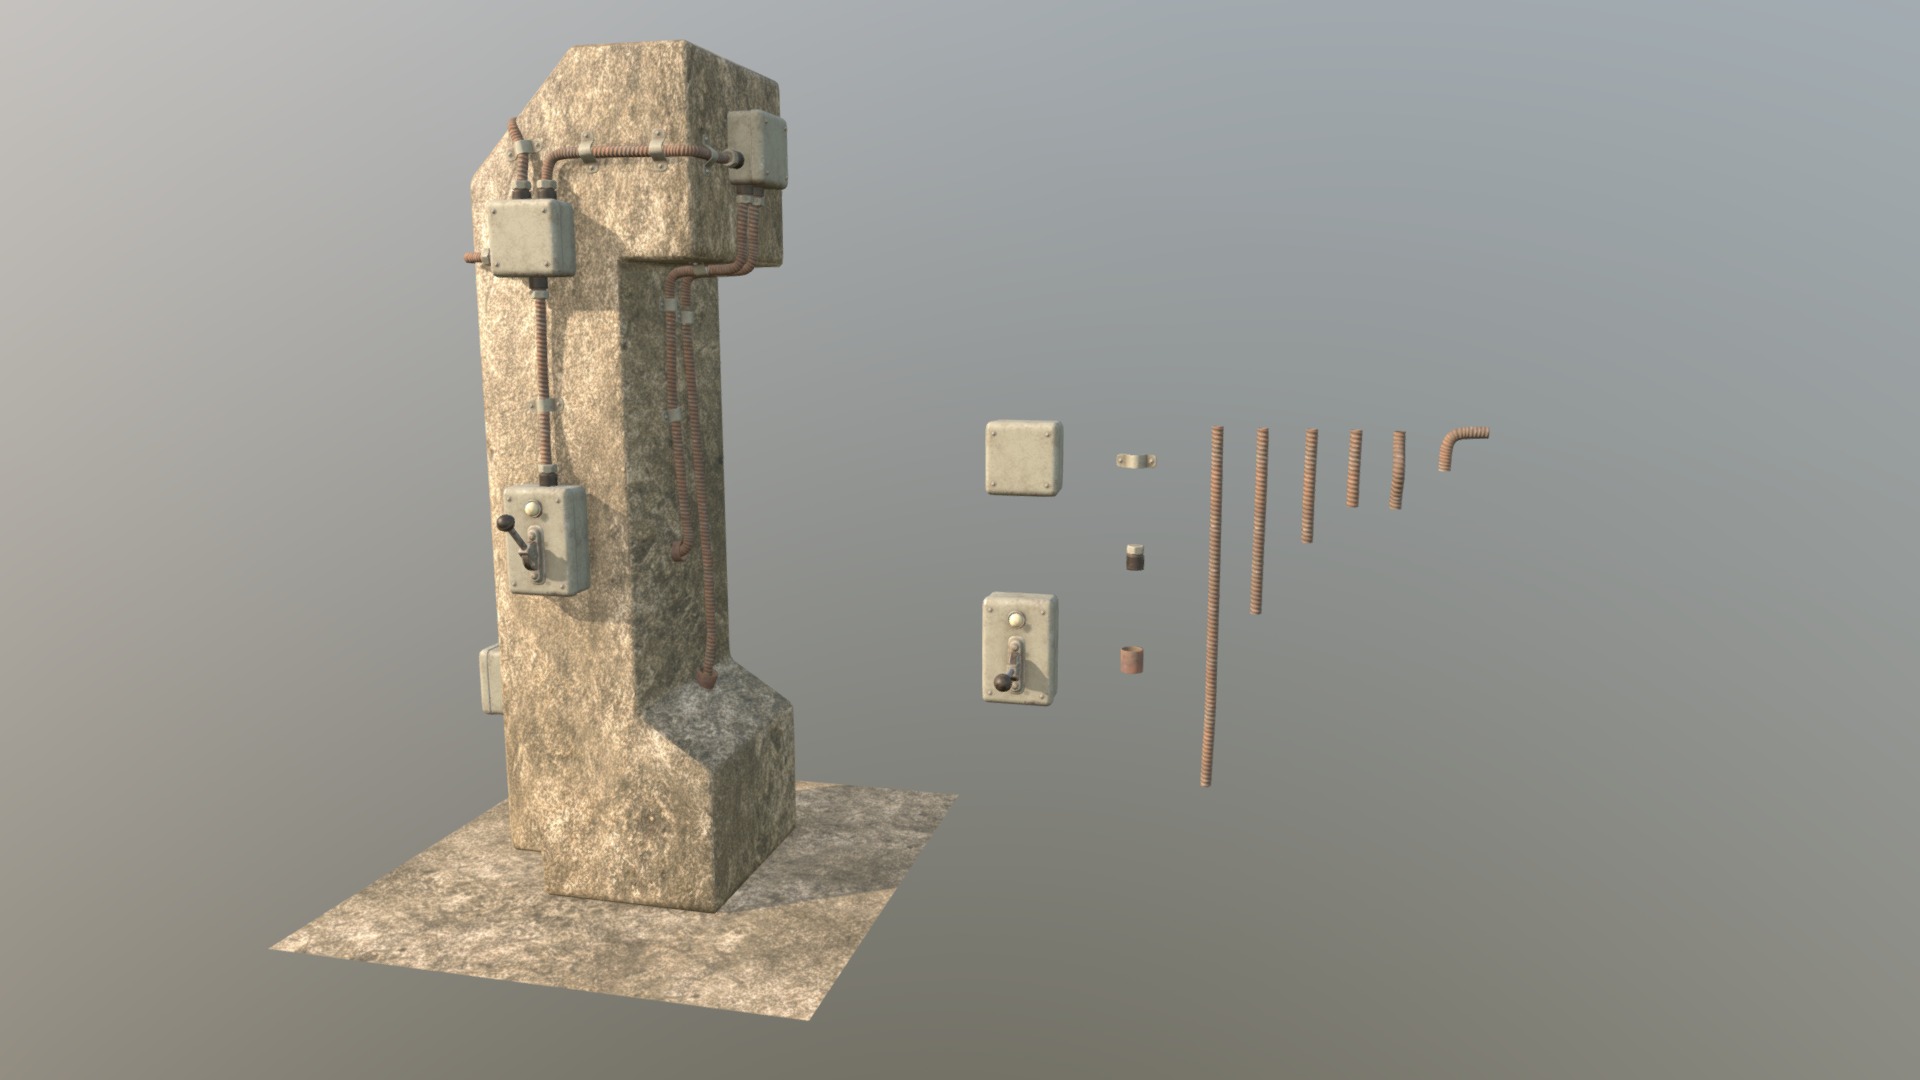 3D model Toggle Switch PBR Constructor - This is a 3D model of the Toggle Switch PBR Constructor. The 3D model is about a stone tower with a rectangular top.